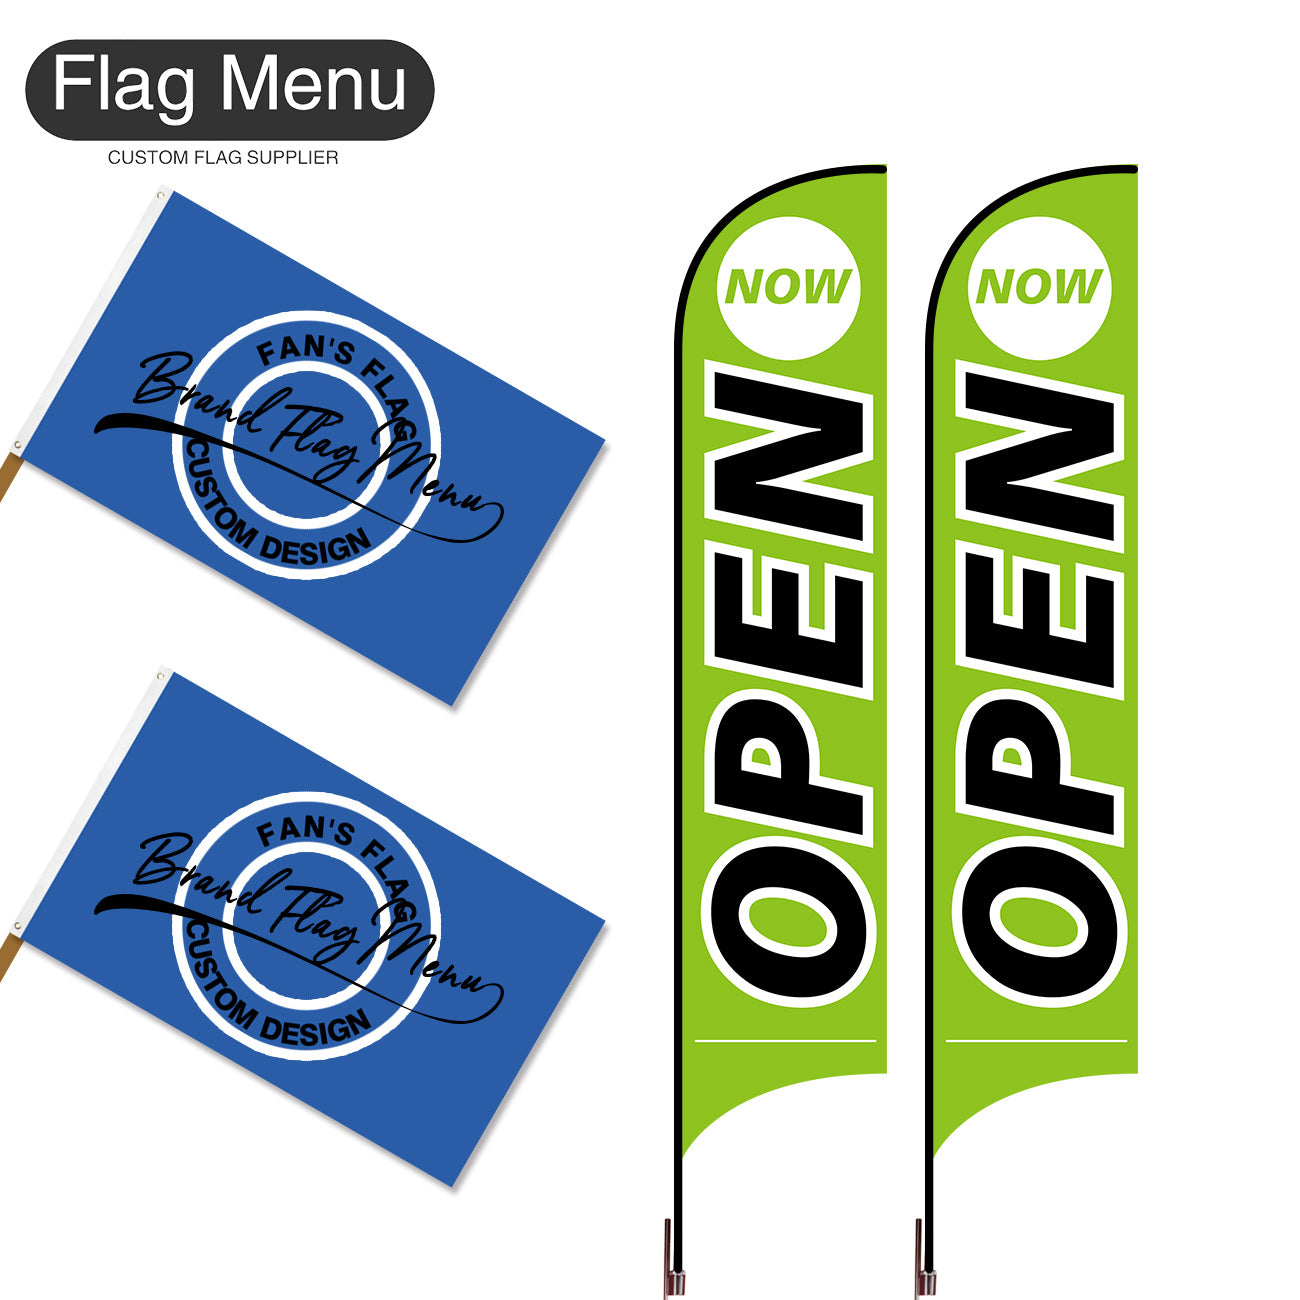 Outdoor Advertising Set - B-Green B-S - Feather Flag -Double Sided & 3'x5' Regular Flag -Single Sided-Cross & Water Bag-Flag Menu